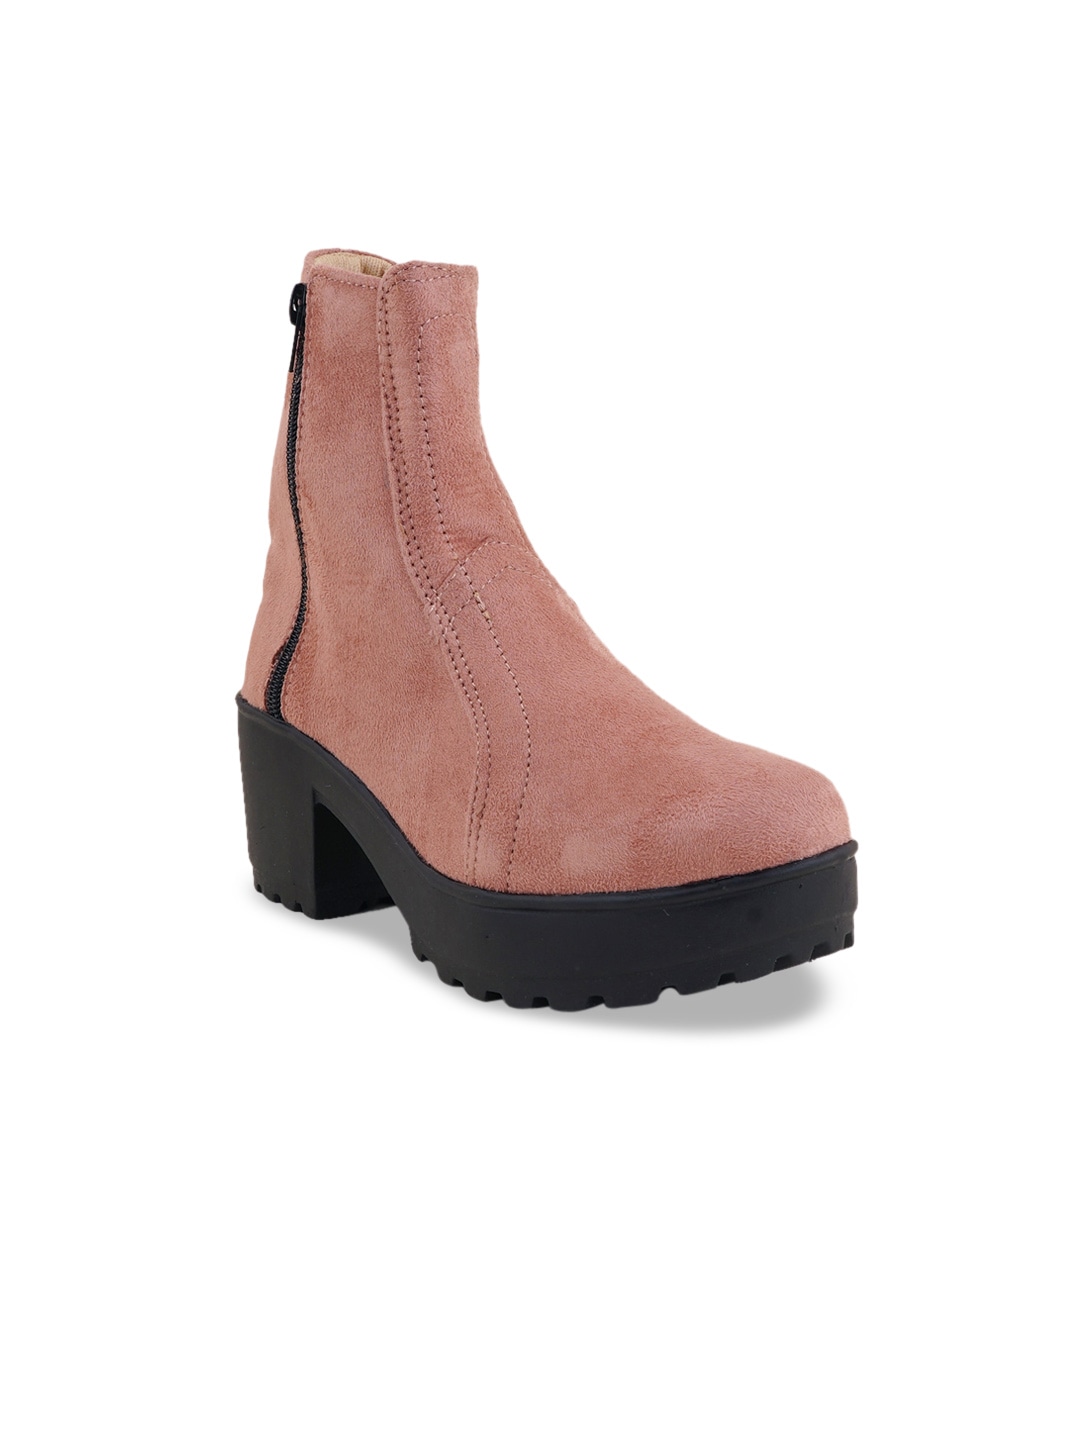 Walkfree Women Peach-Coloured Suede Flat Boots Price in India